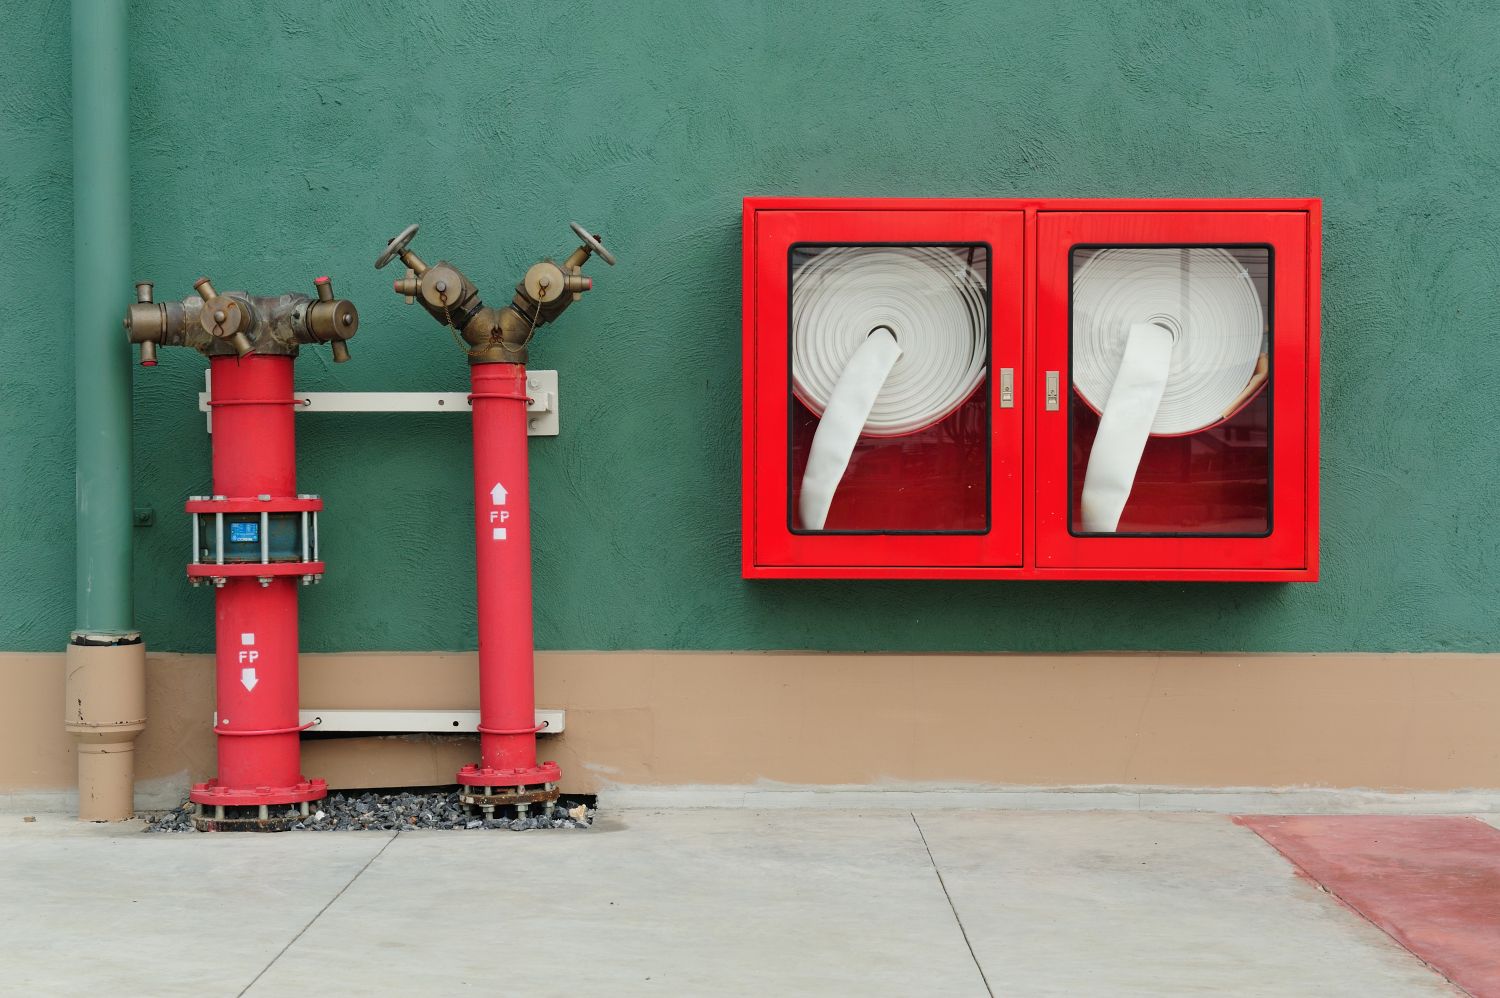 Image of two fire hoses enclosed in red, square glass cases and two stand pipes to the left